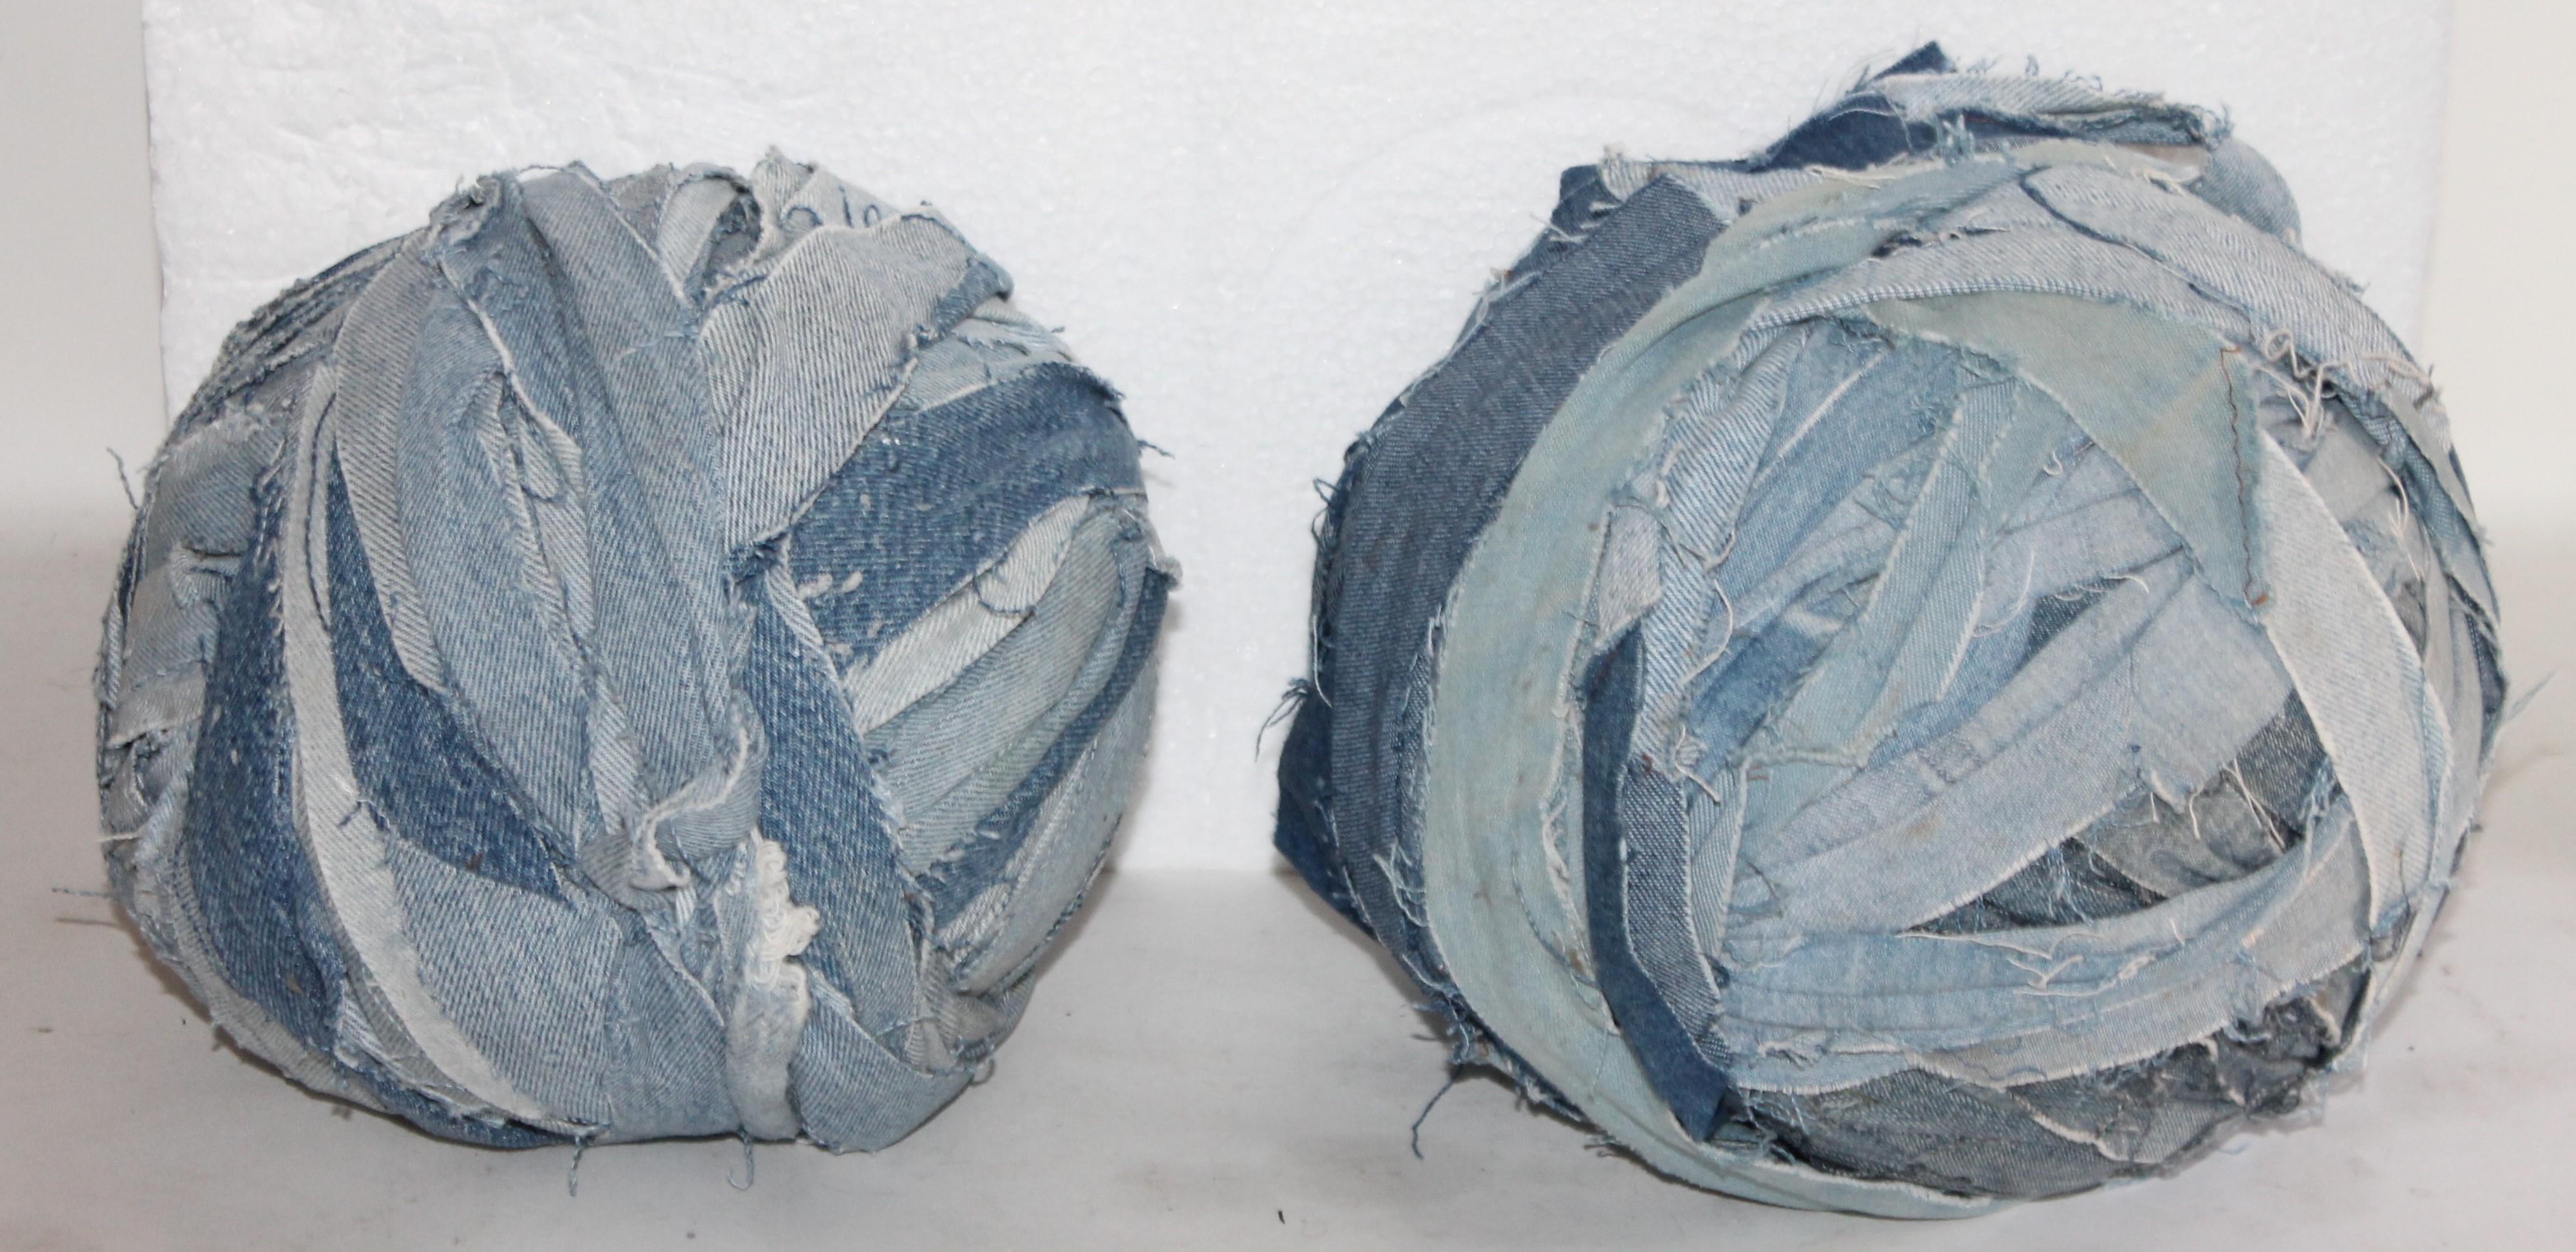 These large Amish denim rag balls used to make braided rugs. Fantastic country look of four rag balls.